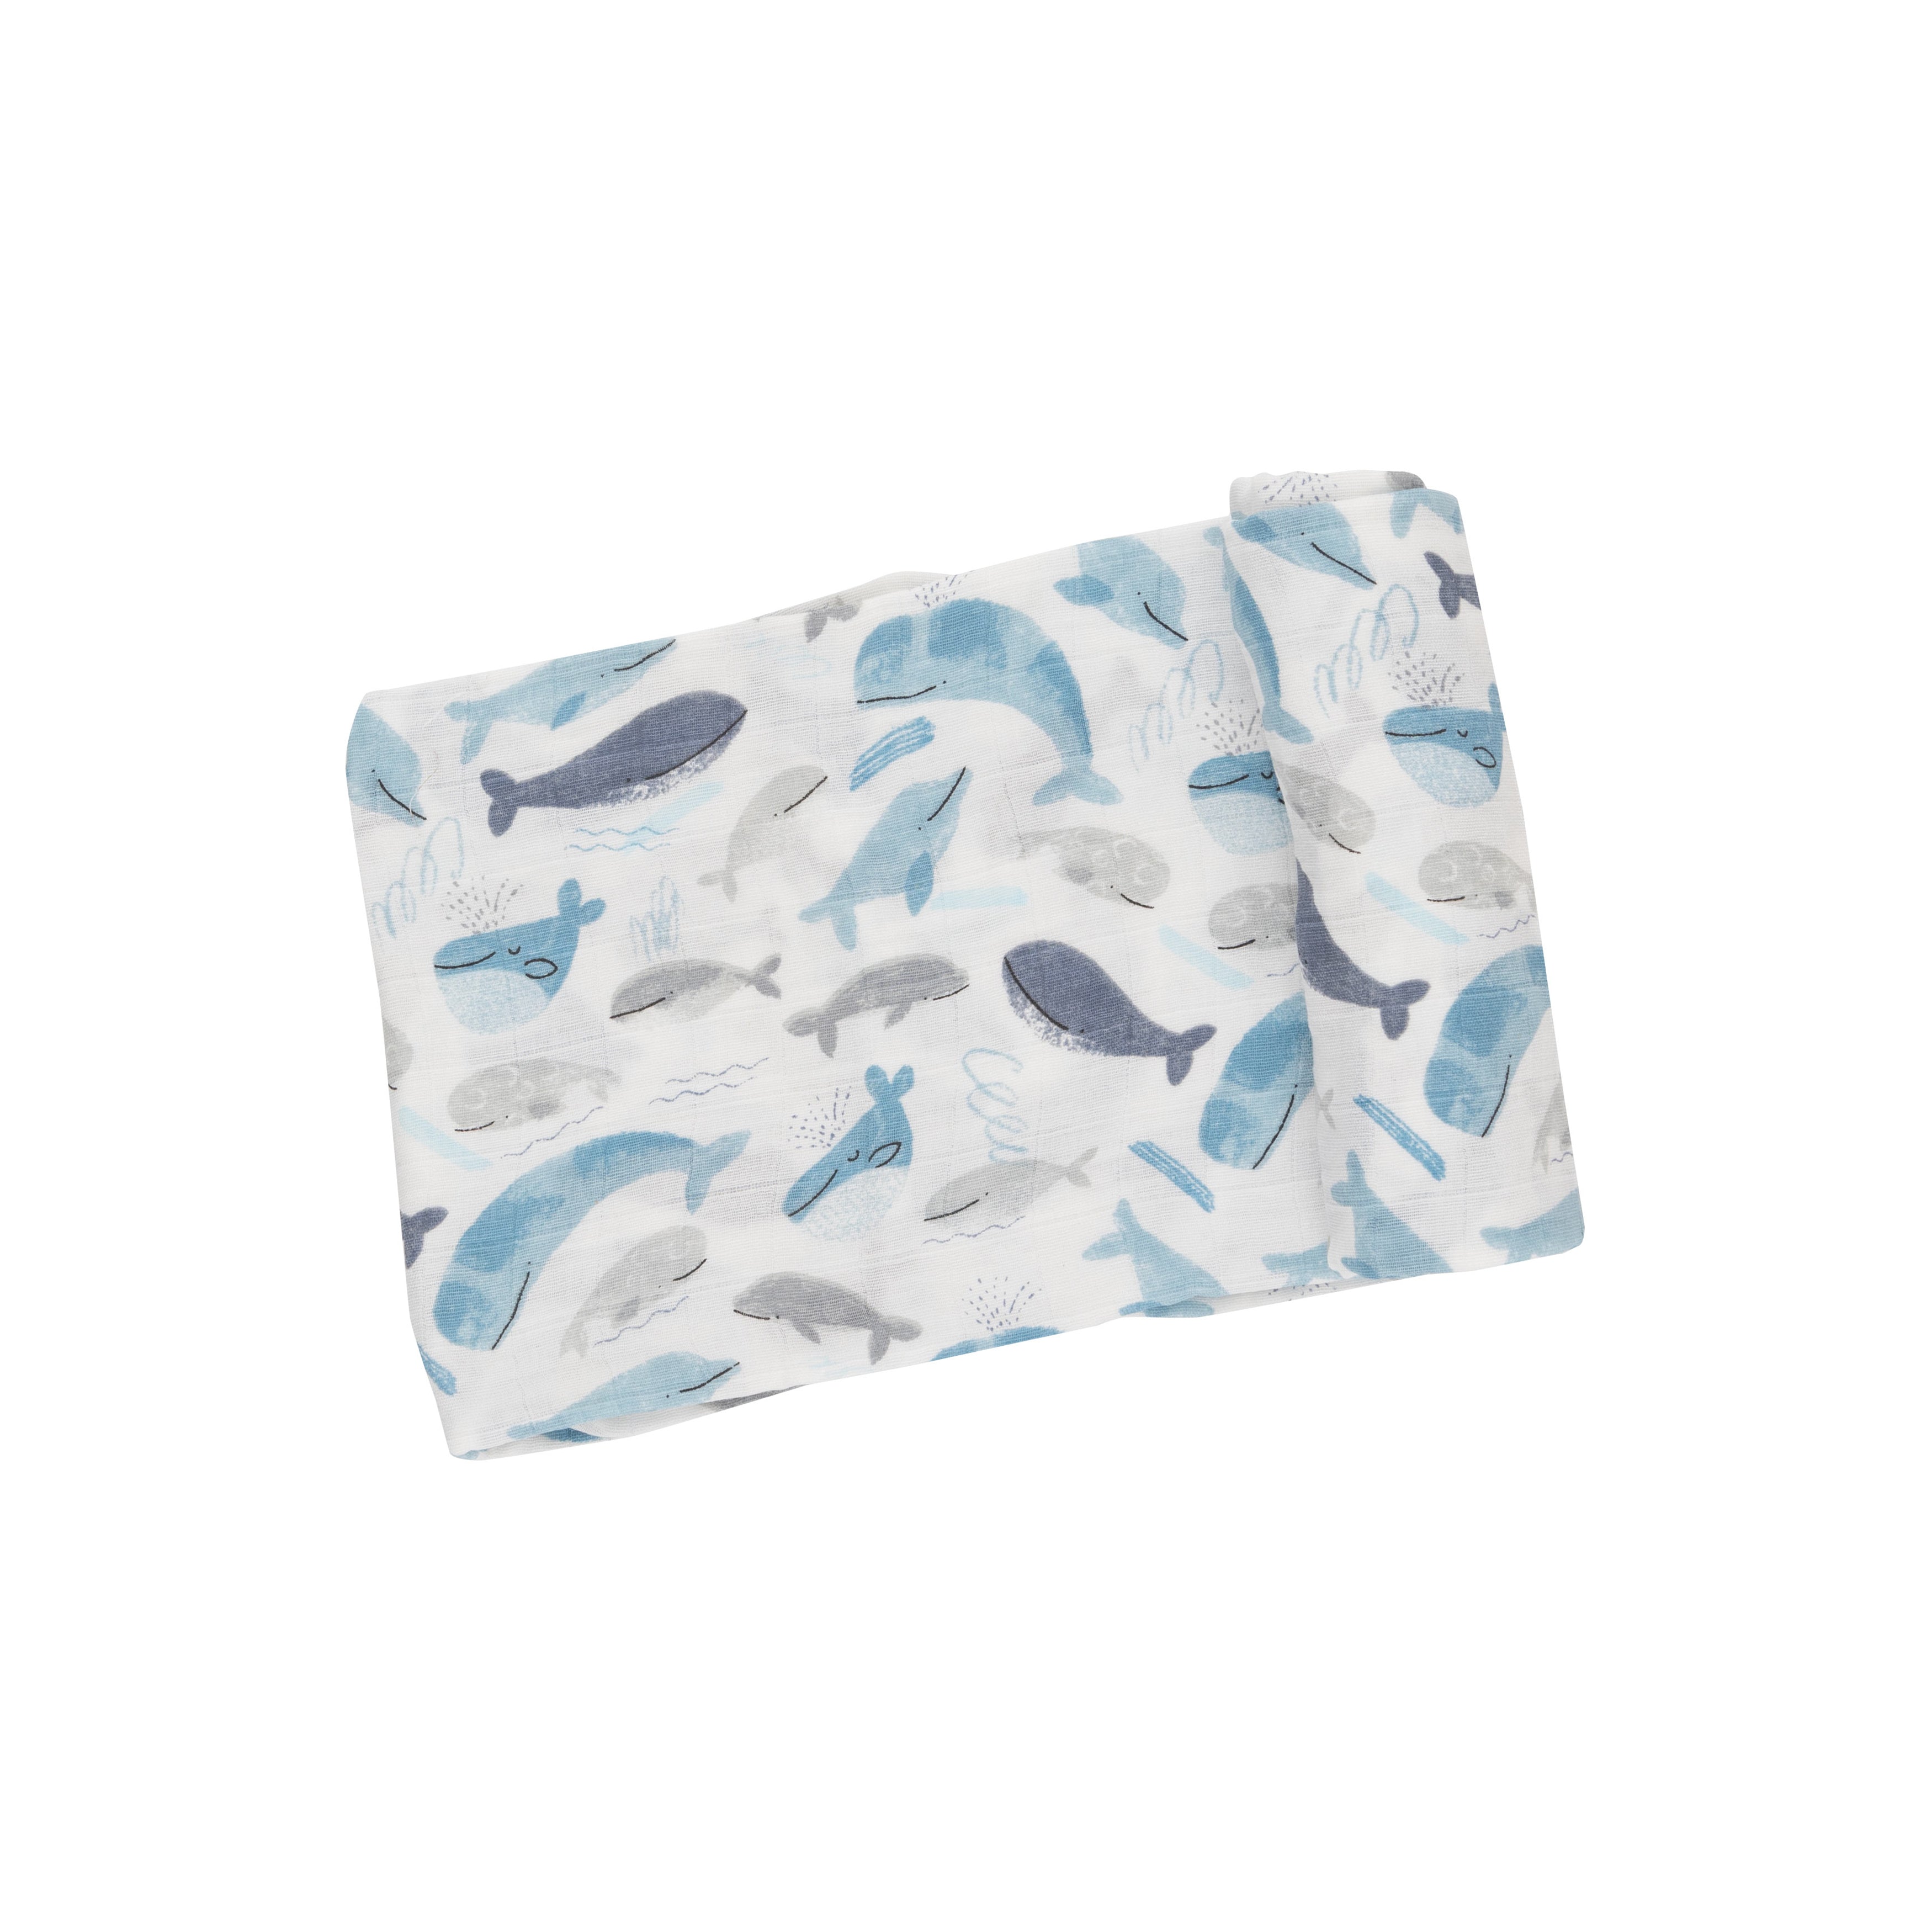 Swaddle Blanket - Blue Whales